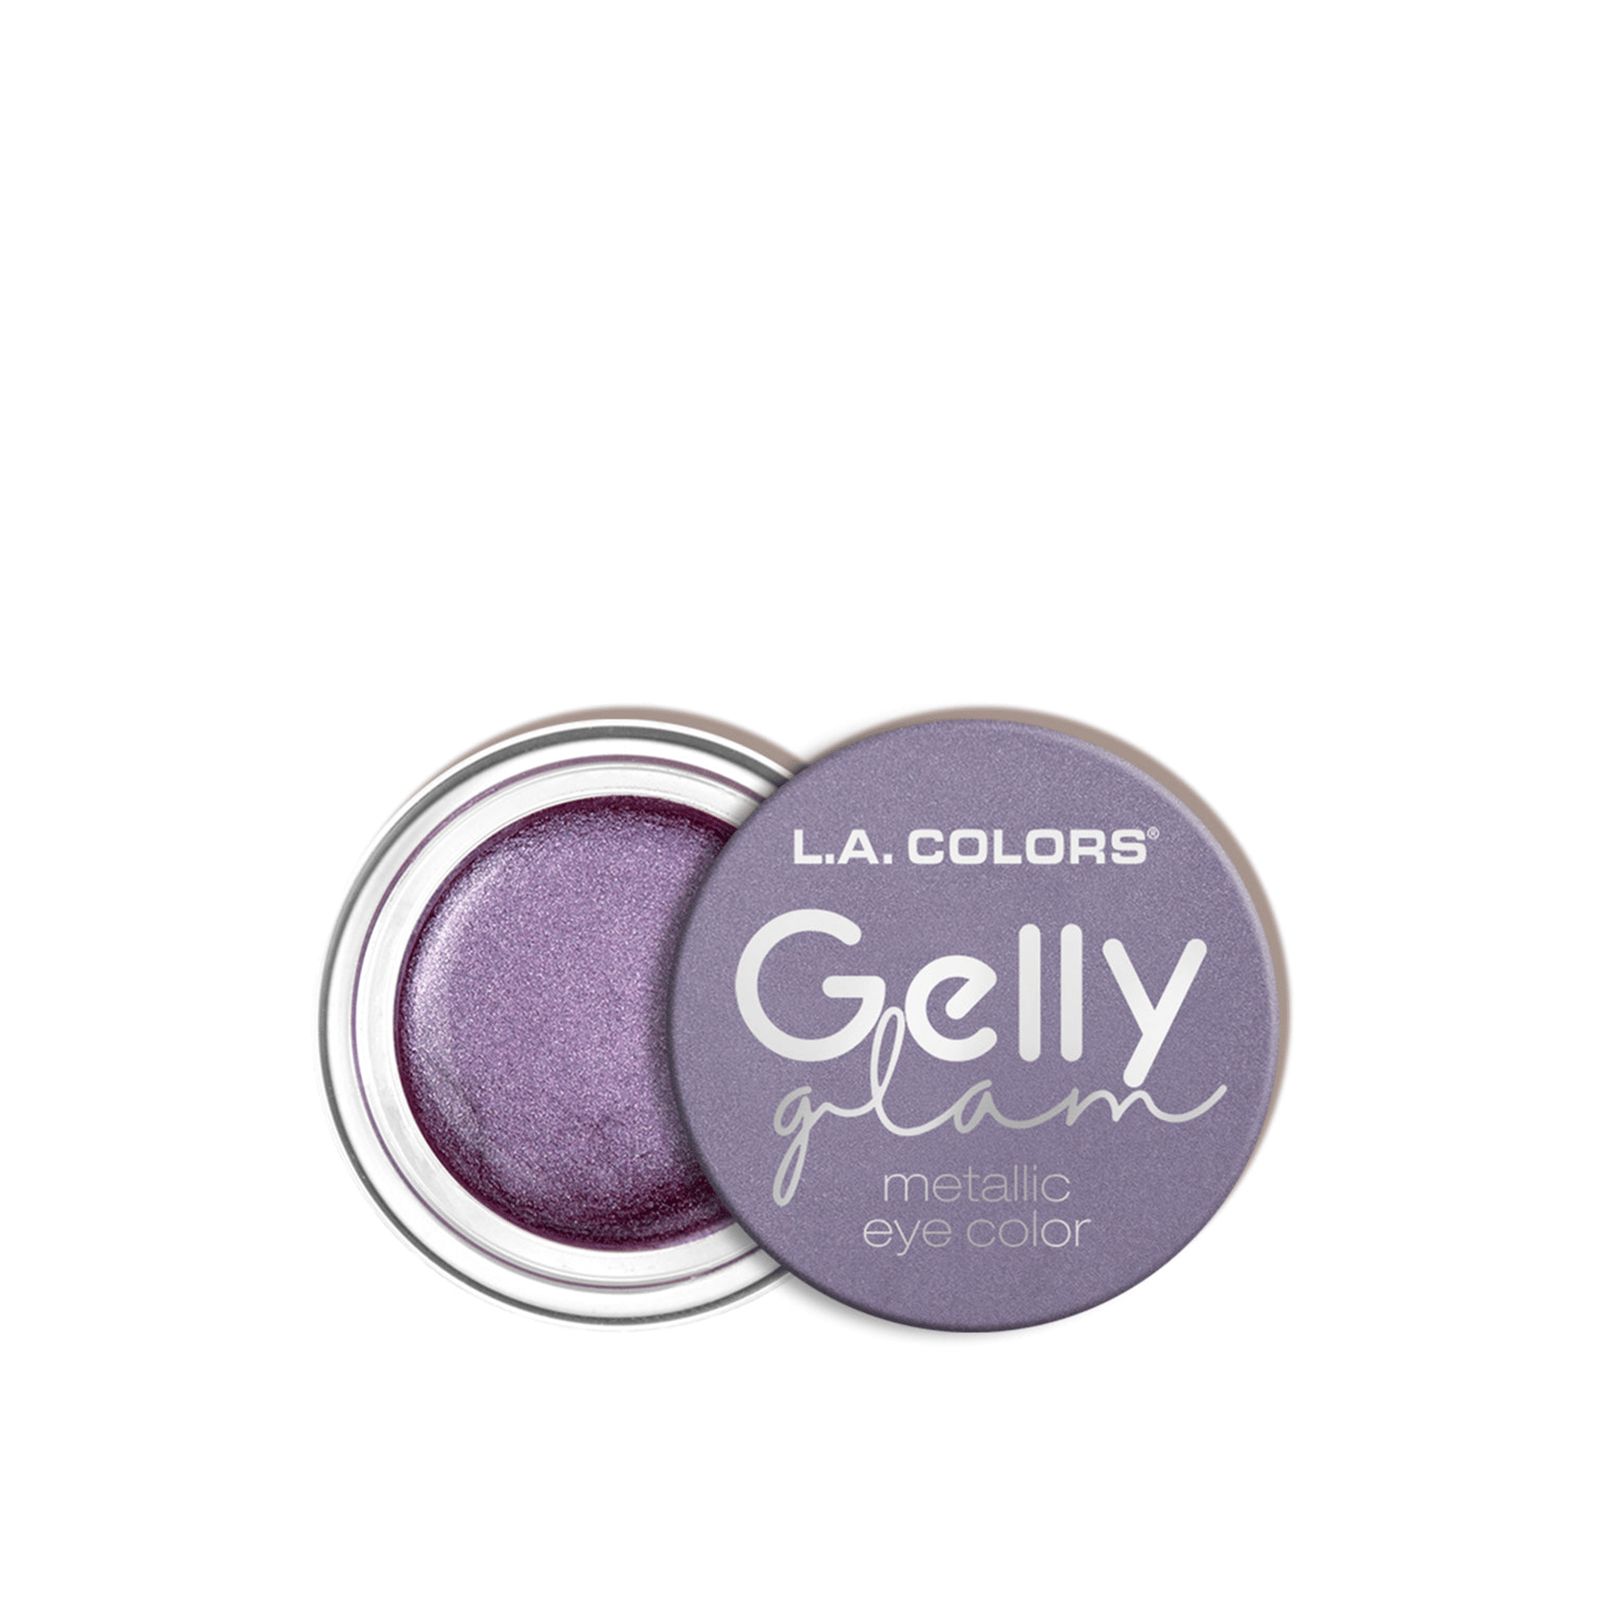 L.A Colors Gelly Glam Metallic Eye Color CES287 Rock Star 5ml